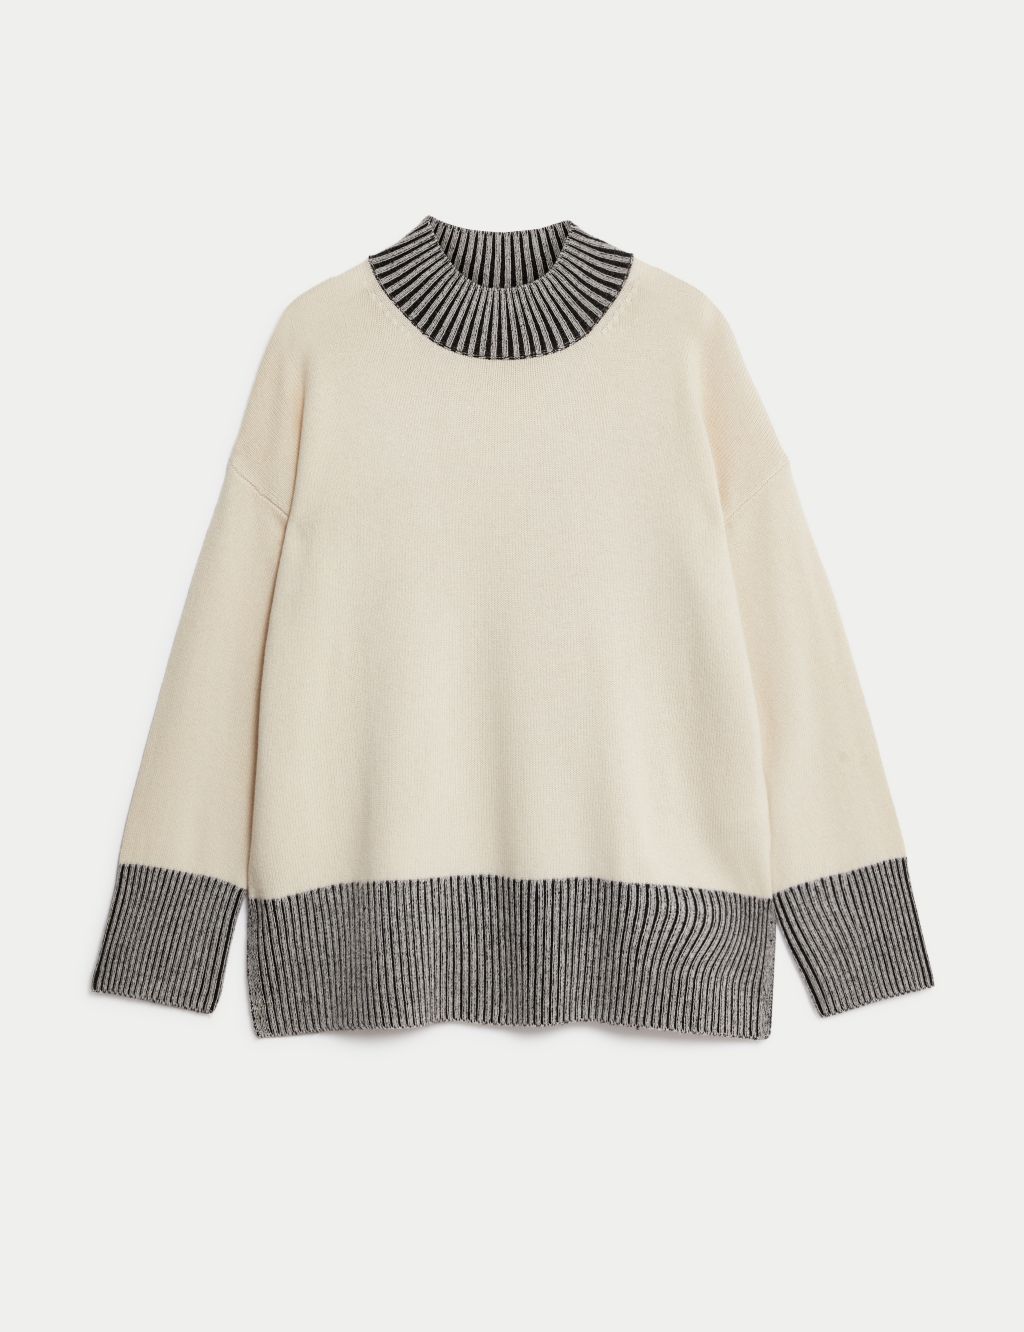 Wool Rich Funnel Neck Jumper with Cashmere image 2